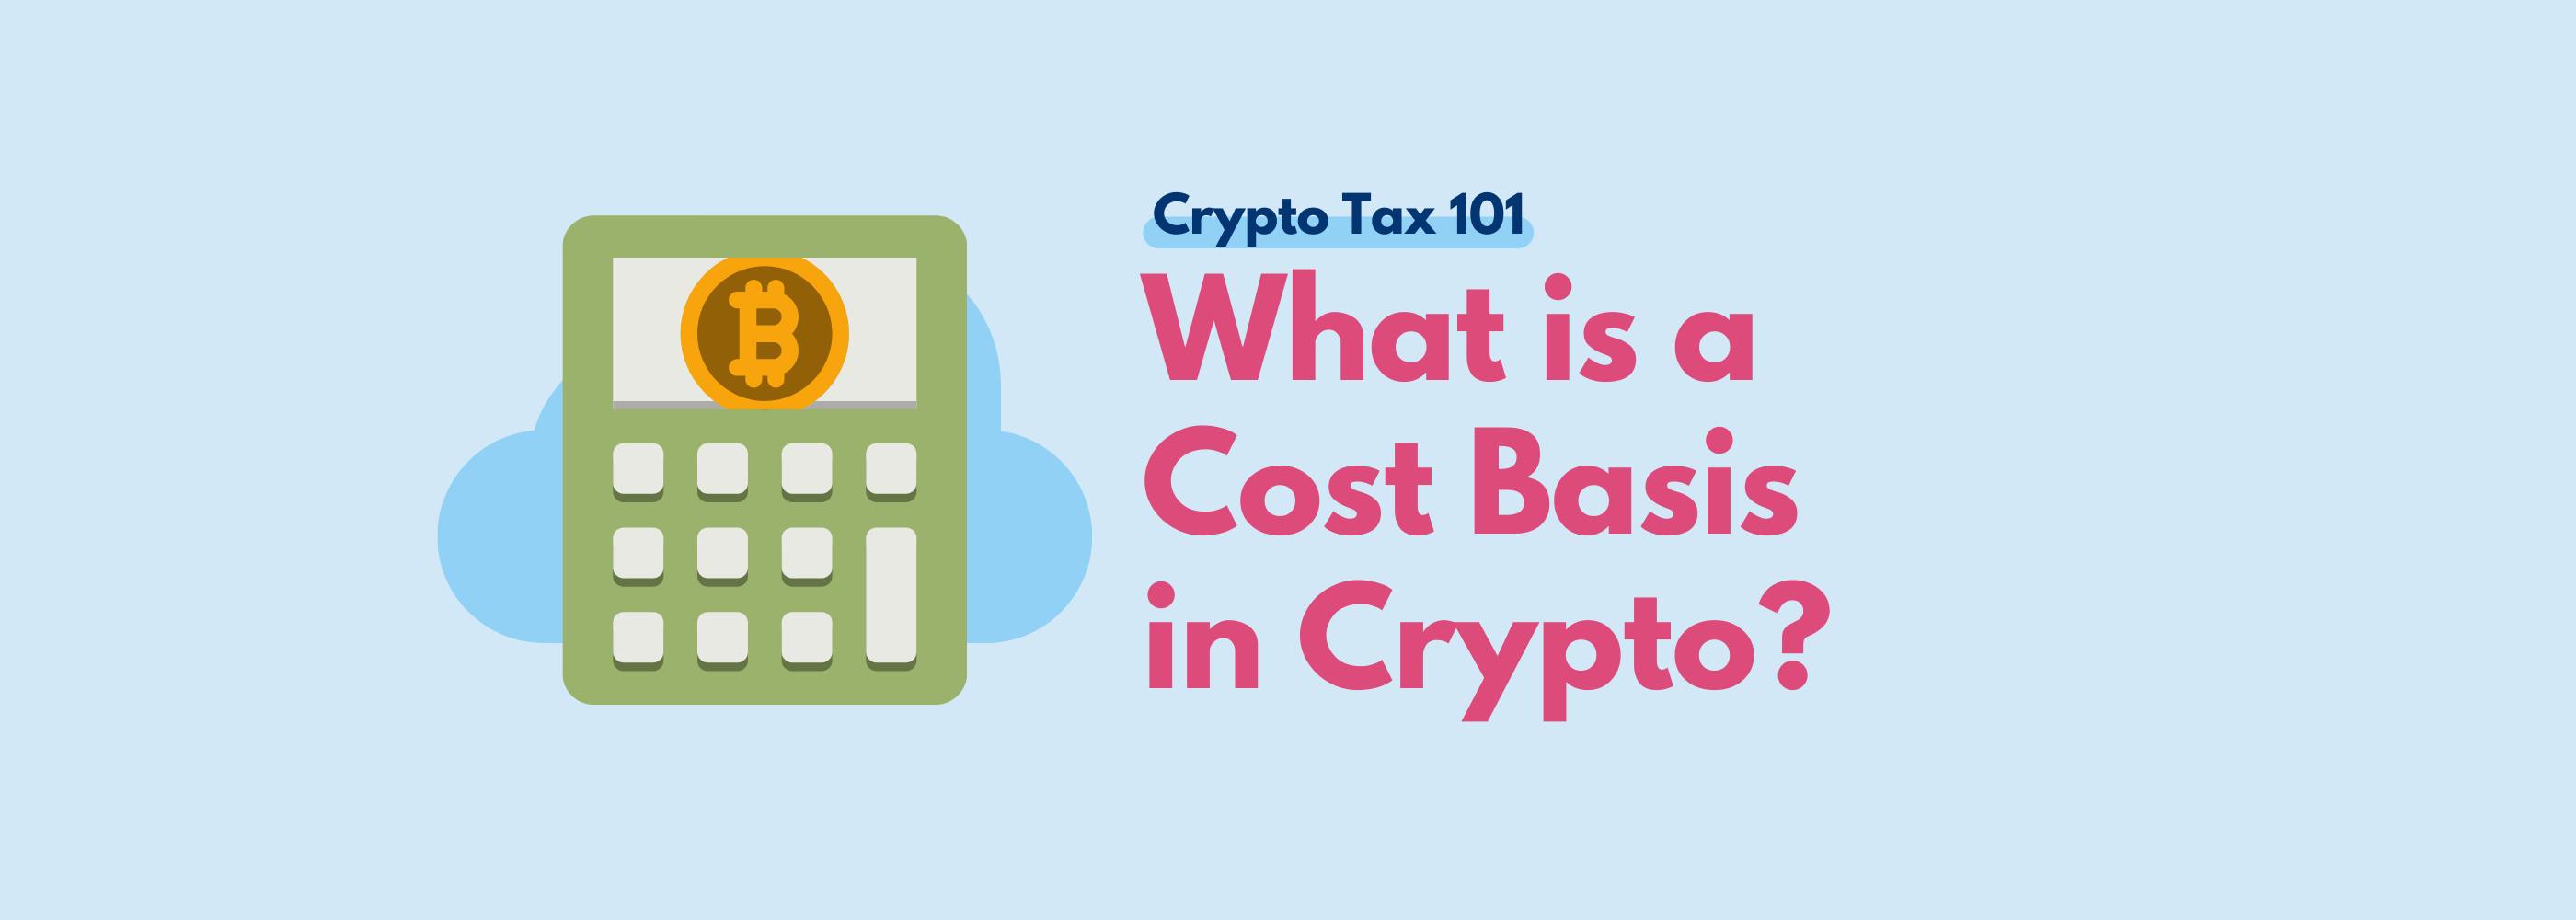 Cryptocurrency calculator Koinly explains cost basis. 